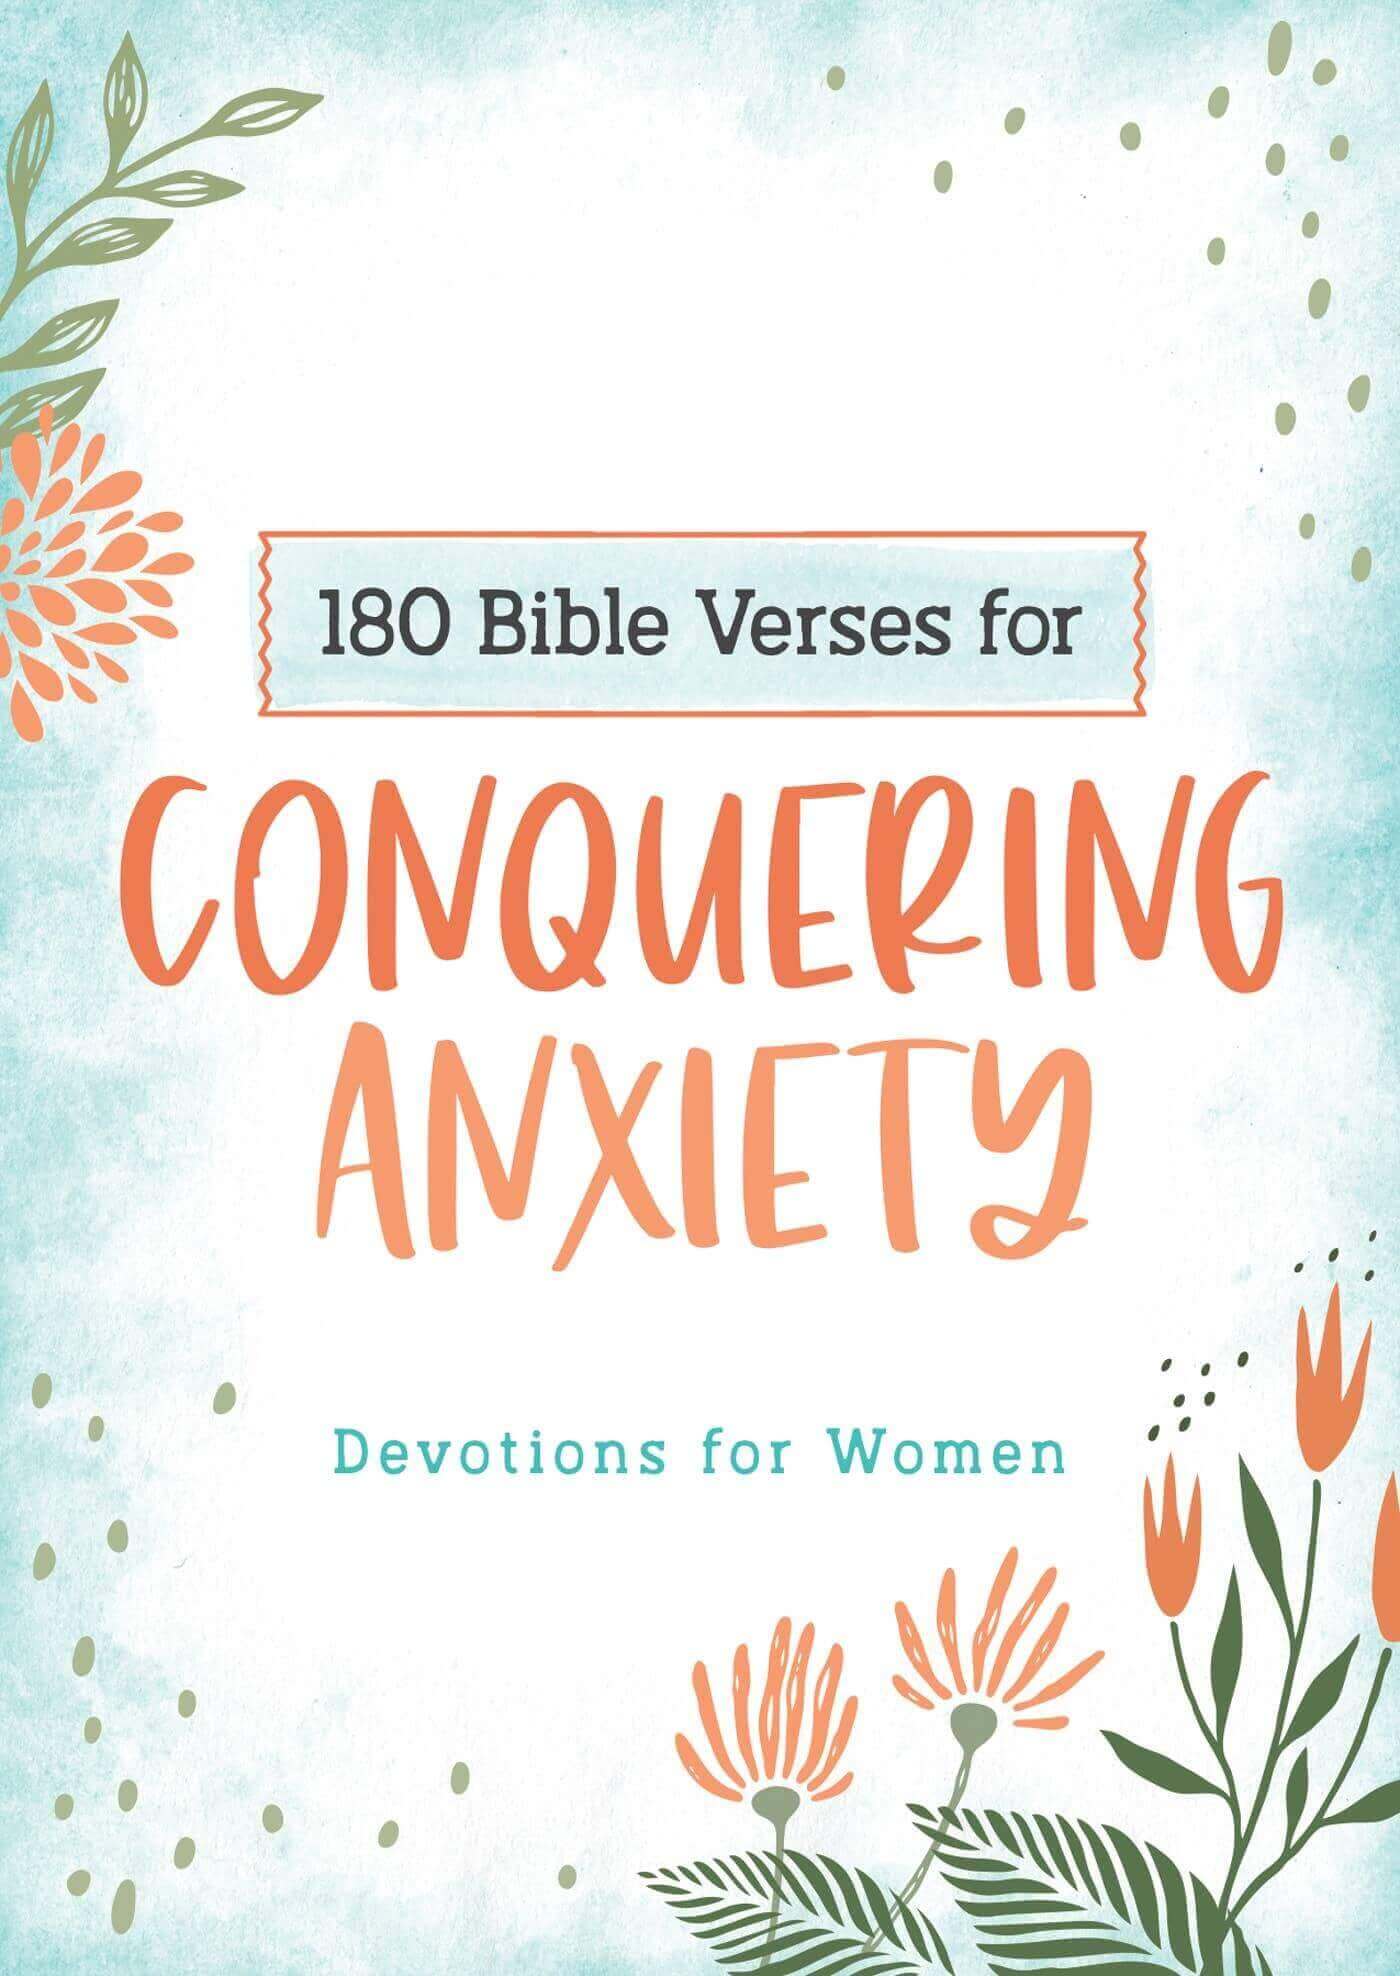 180 Bible Verses for Conquering Anxiety | 2FruitBearers